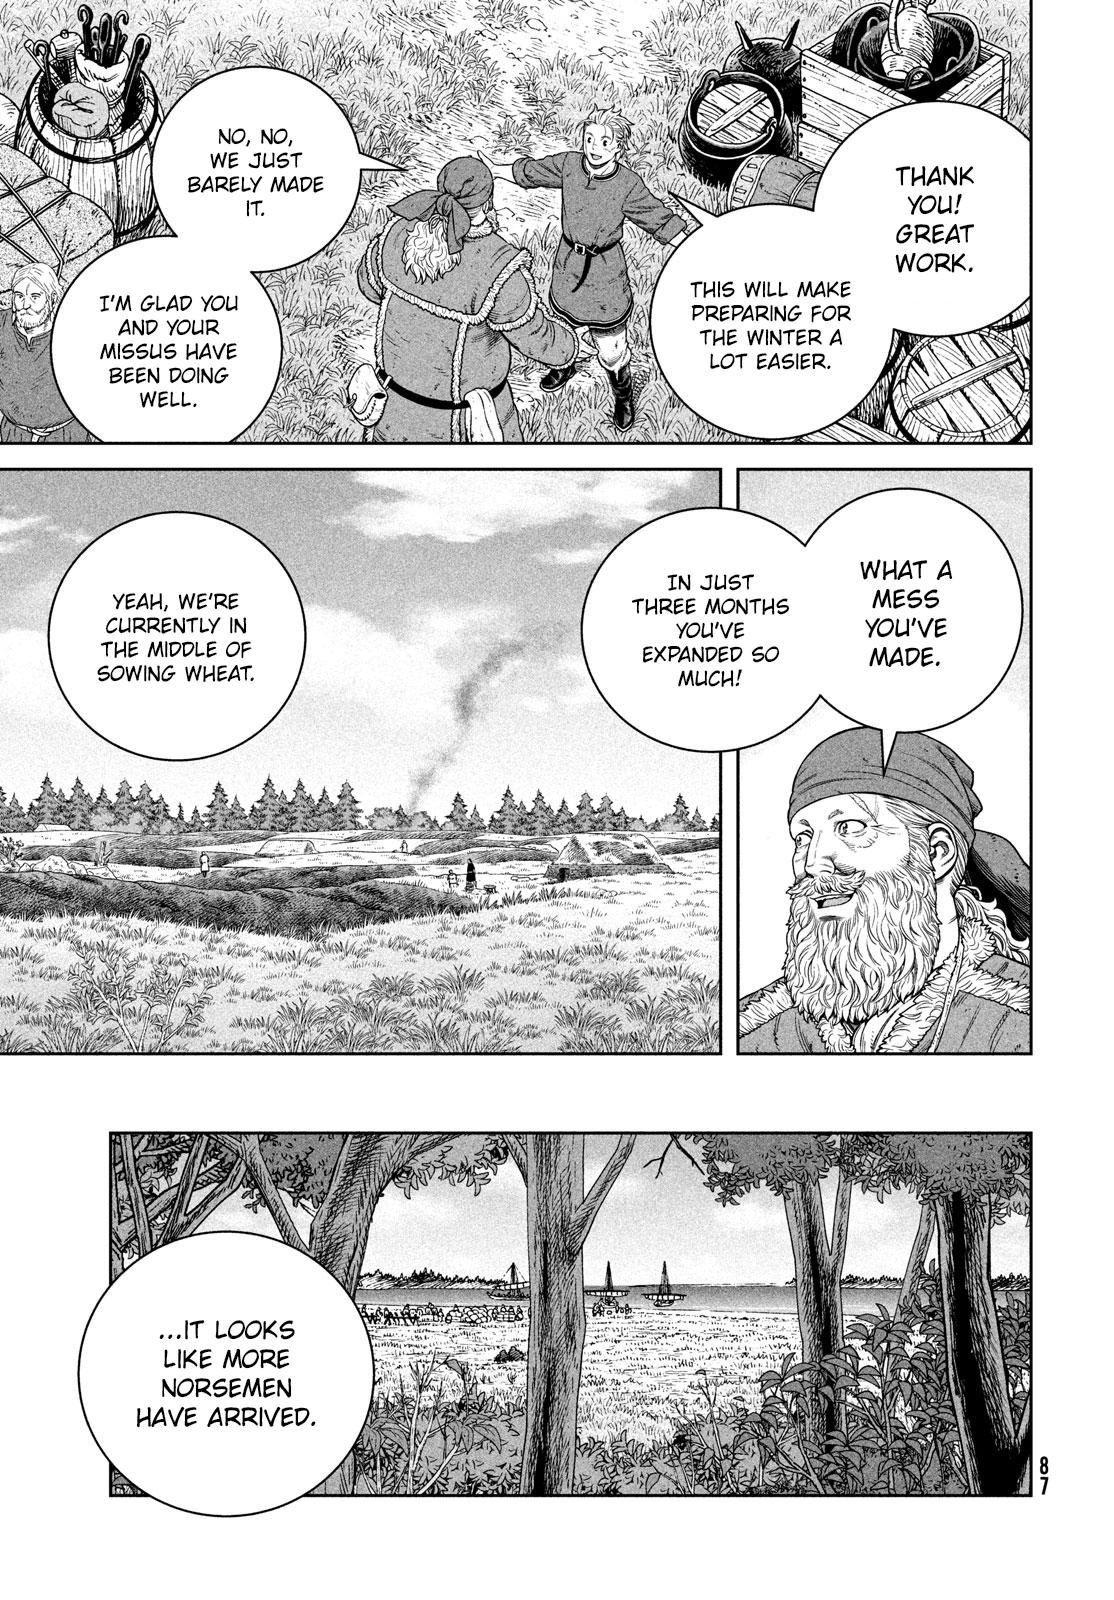 vinland saga 185, vinland saga 185, Read vinland saga 185, vinland saga 185 Manga, vinland saga 185 english, vinland saga 185 raw manga, vinland saga 185 online, vinland saga 185 high quality, vinland saga 185 chapter, vinland saga 185 manga scan